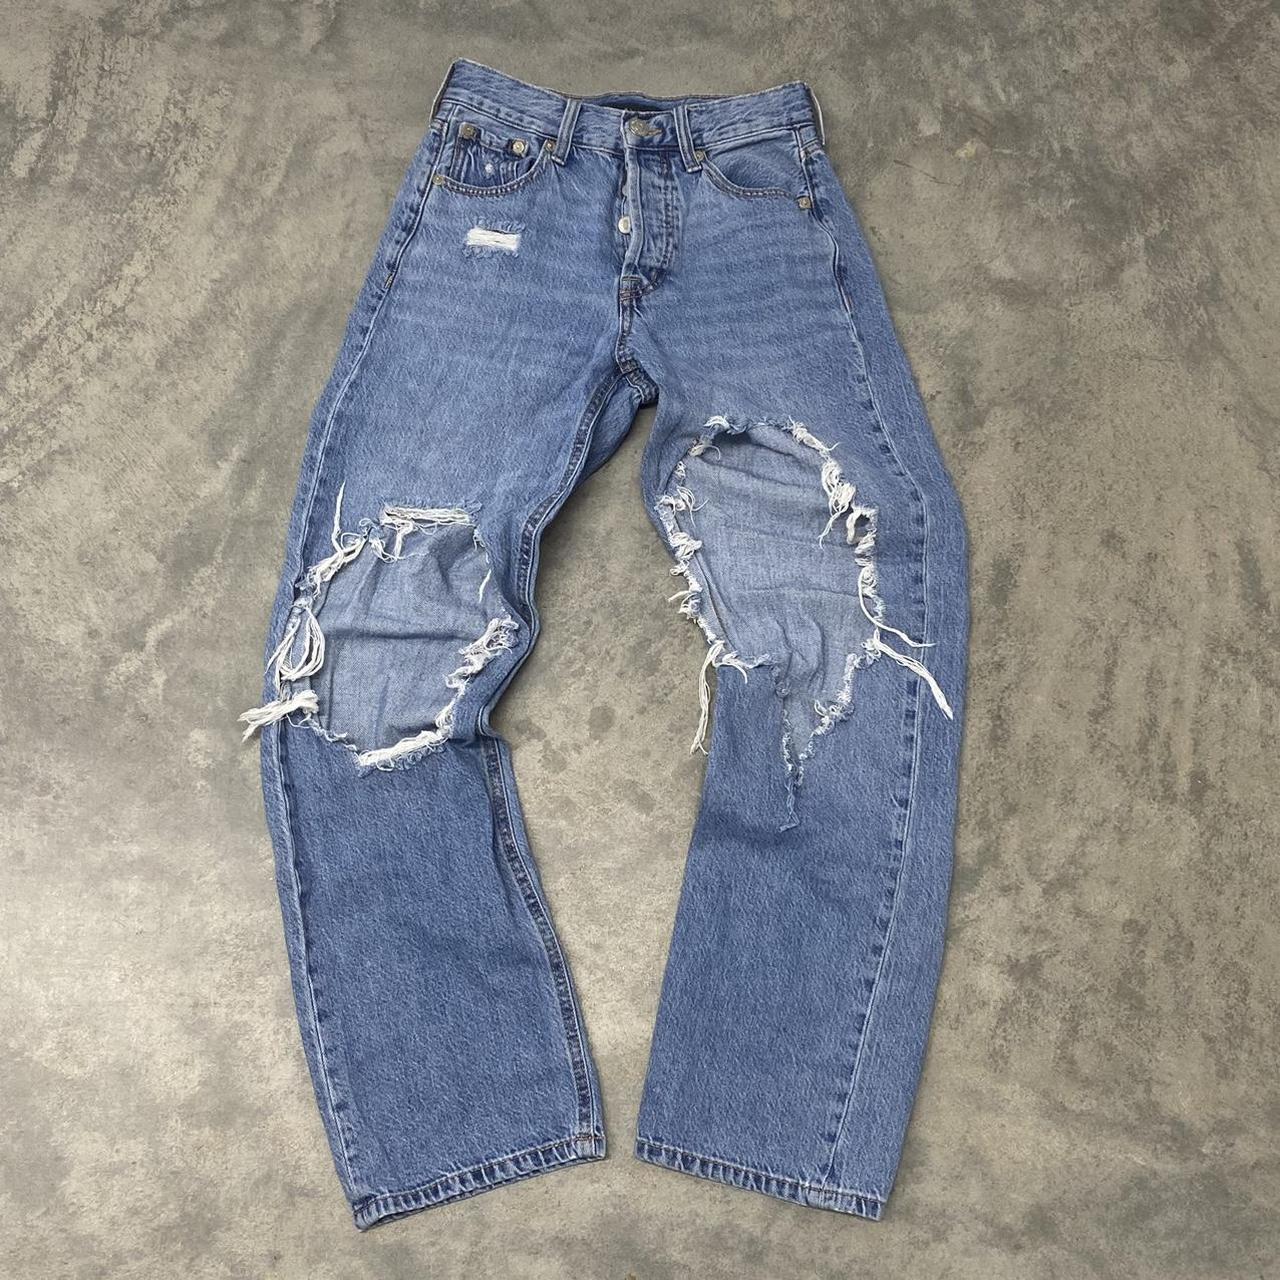 Y2k Baggy Ripped Jeans 26 x 30 Condition... - Depop